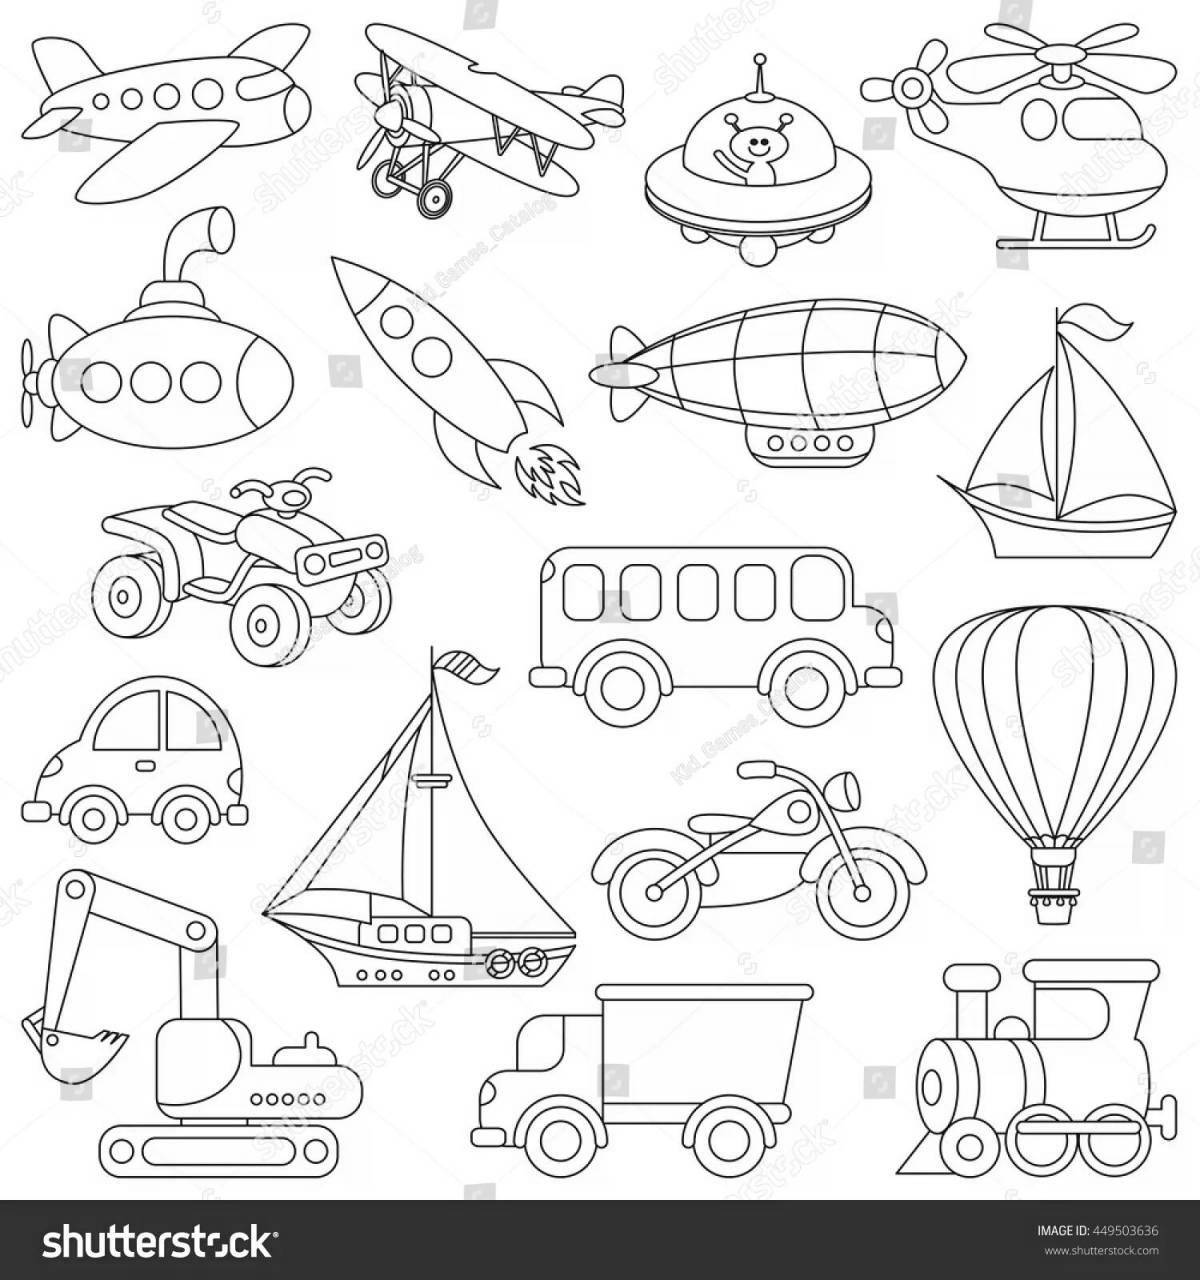 Playful truck coloring page for 6-7 year olds